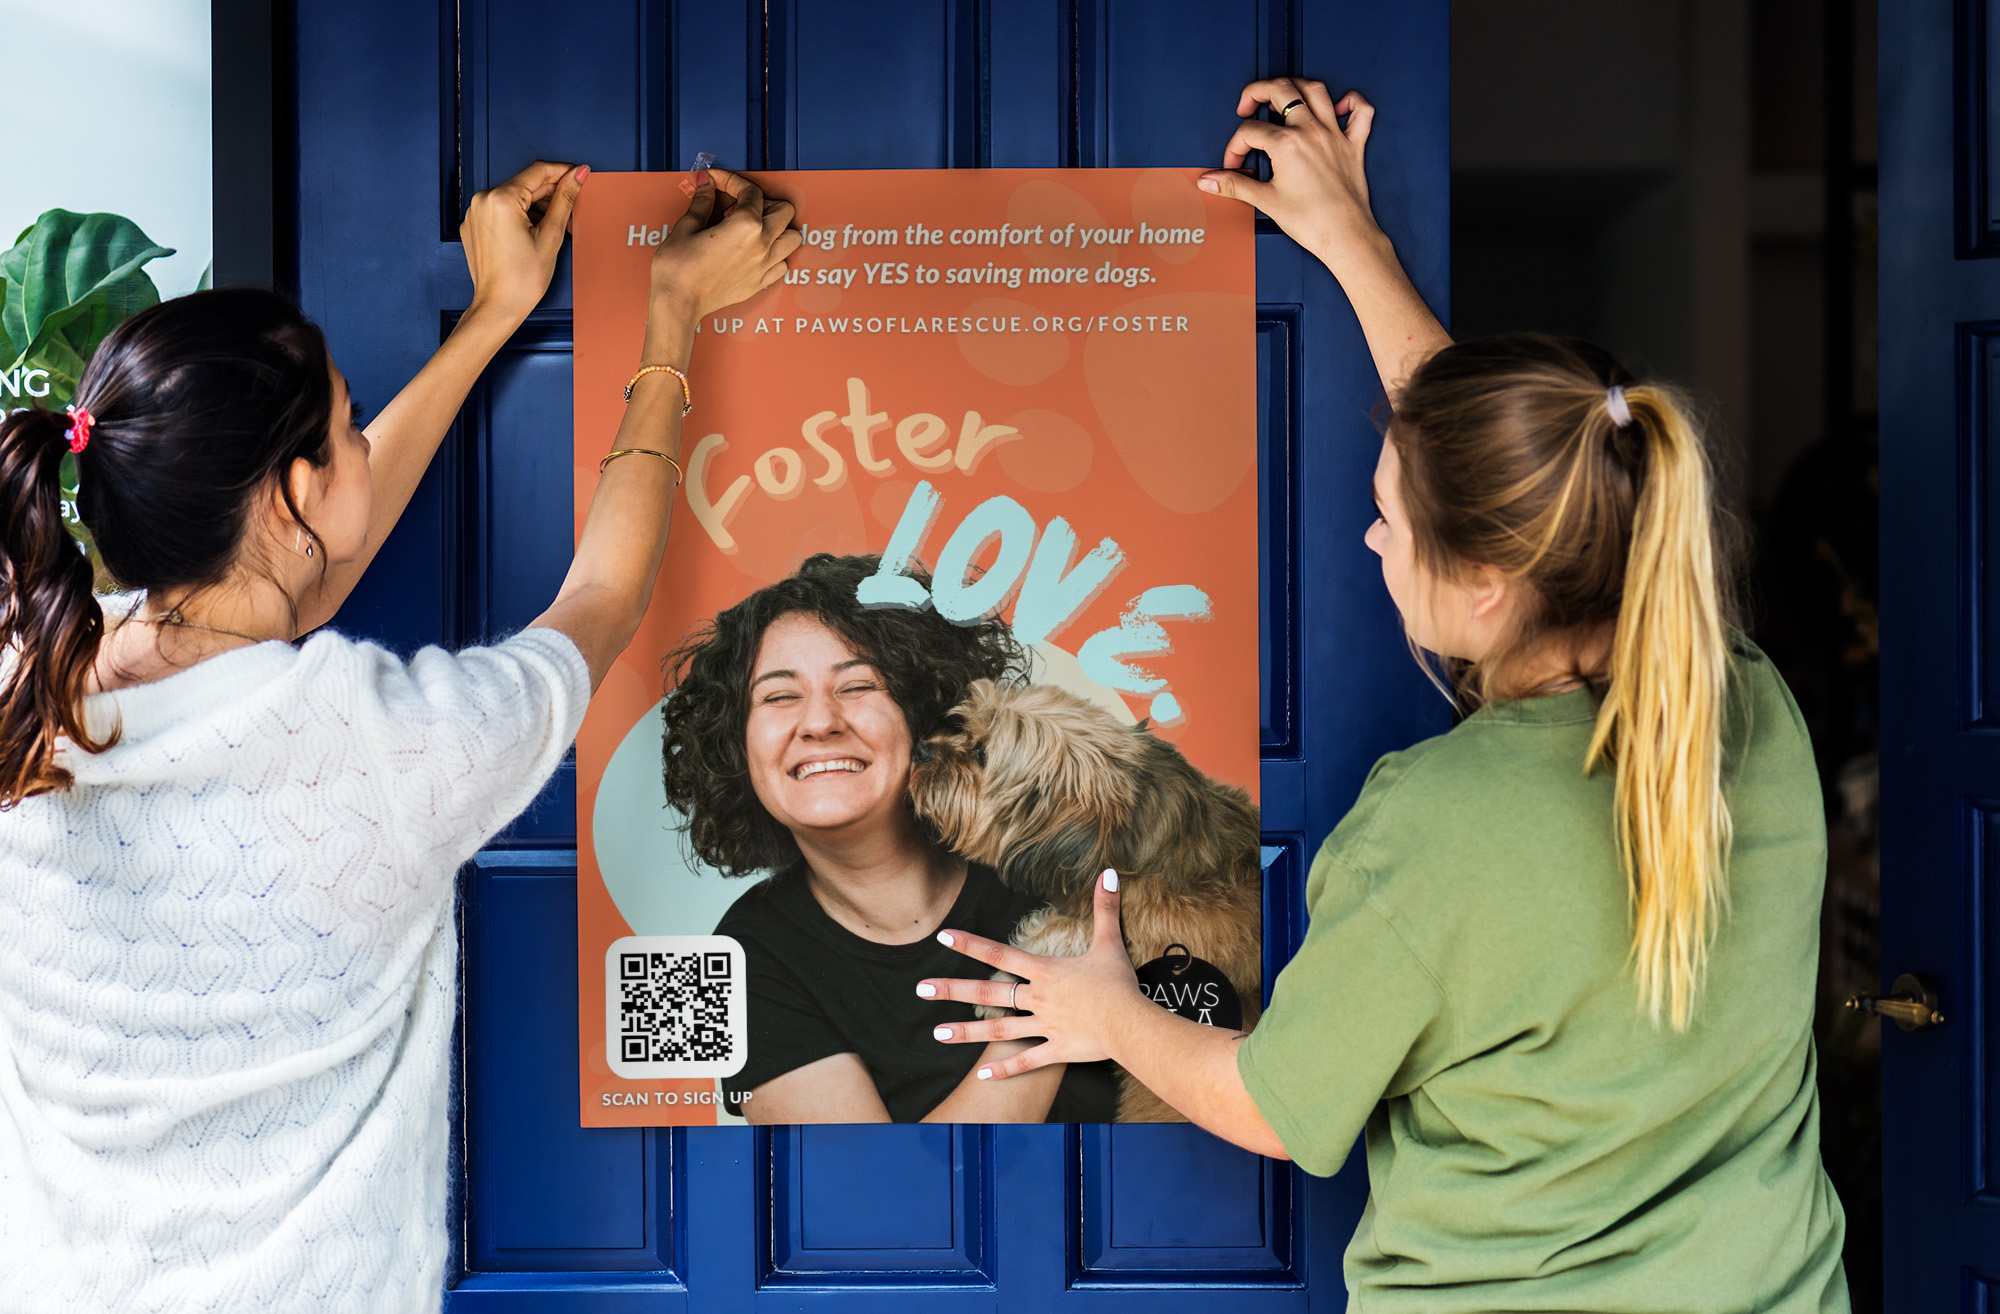 A mockup image of two people putting up a poster, which reads ‘Foster Love’ in cheerful orange and blue. The main image is a dog trying to lick a laughing person’s face.